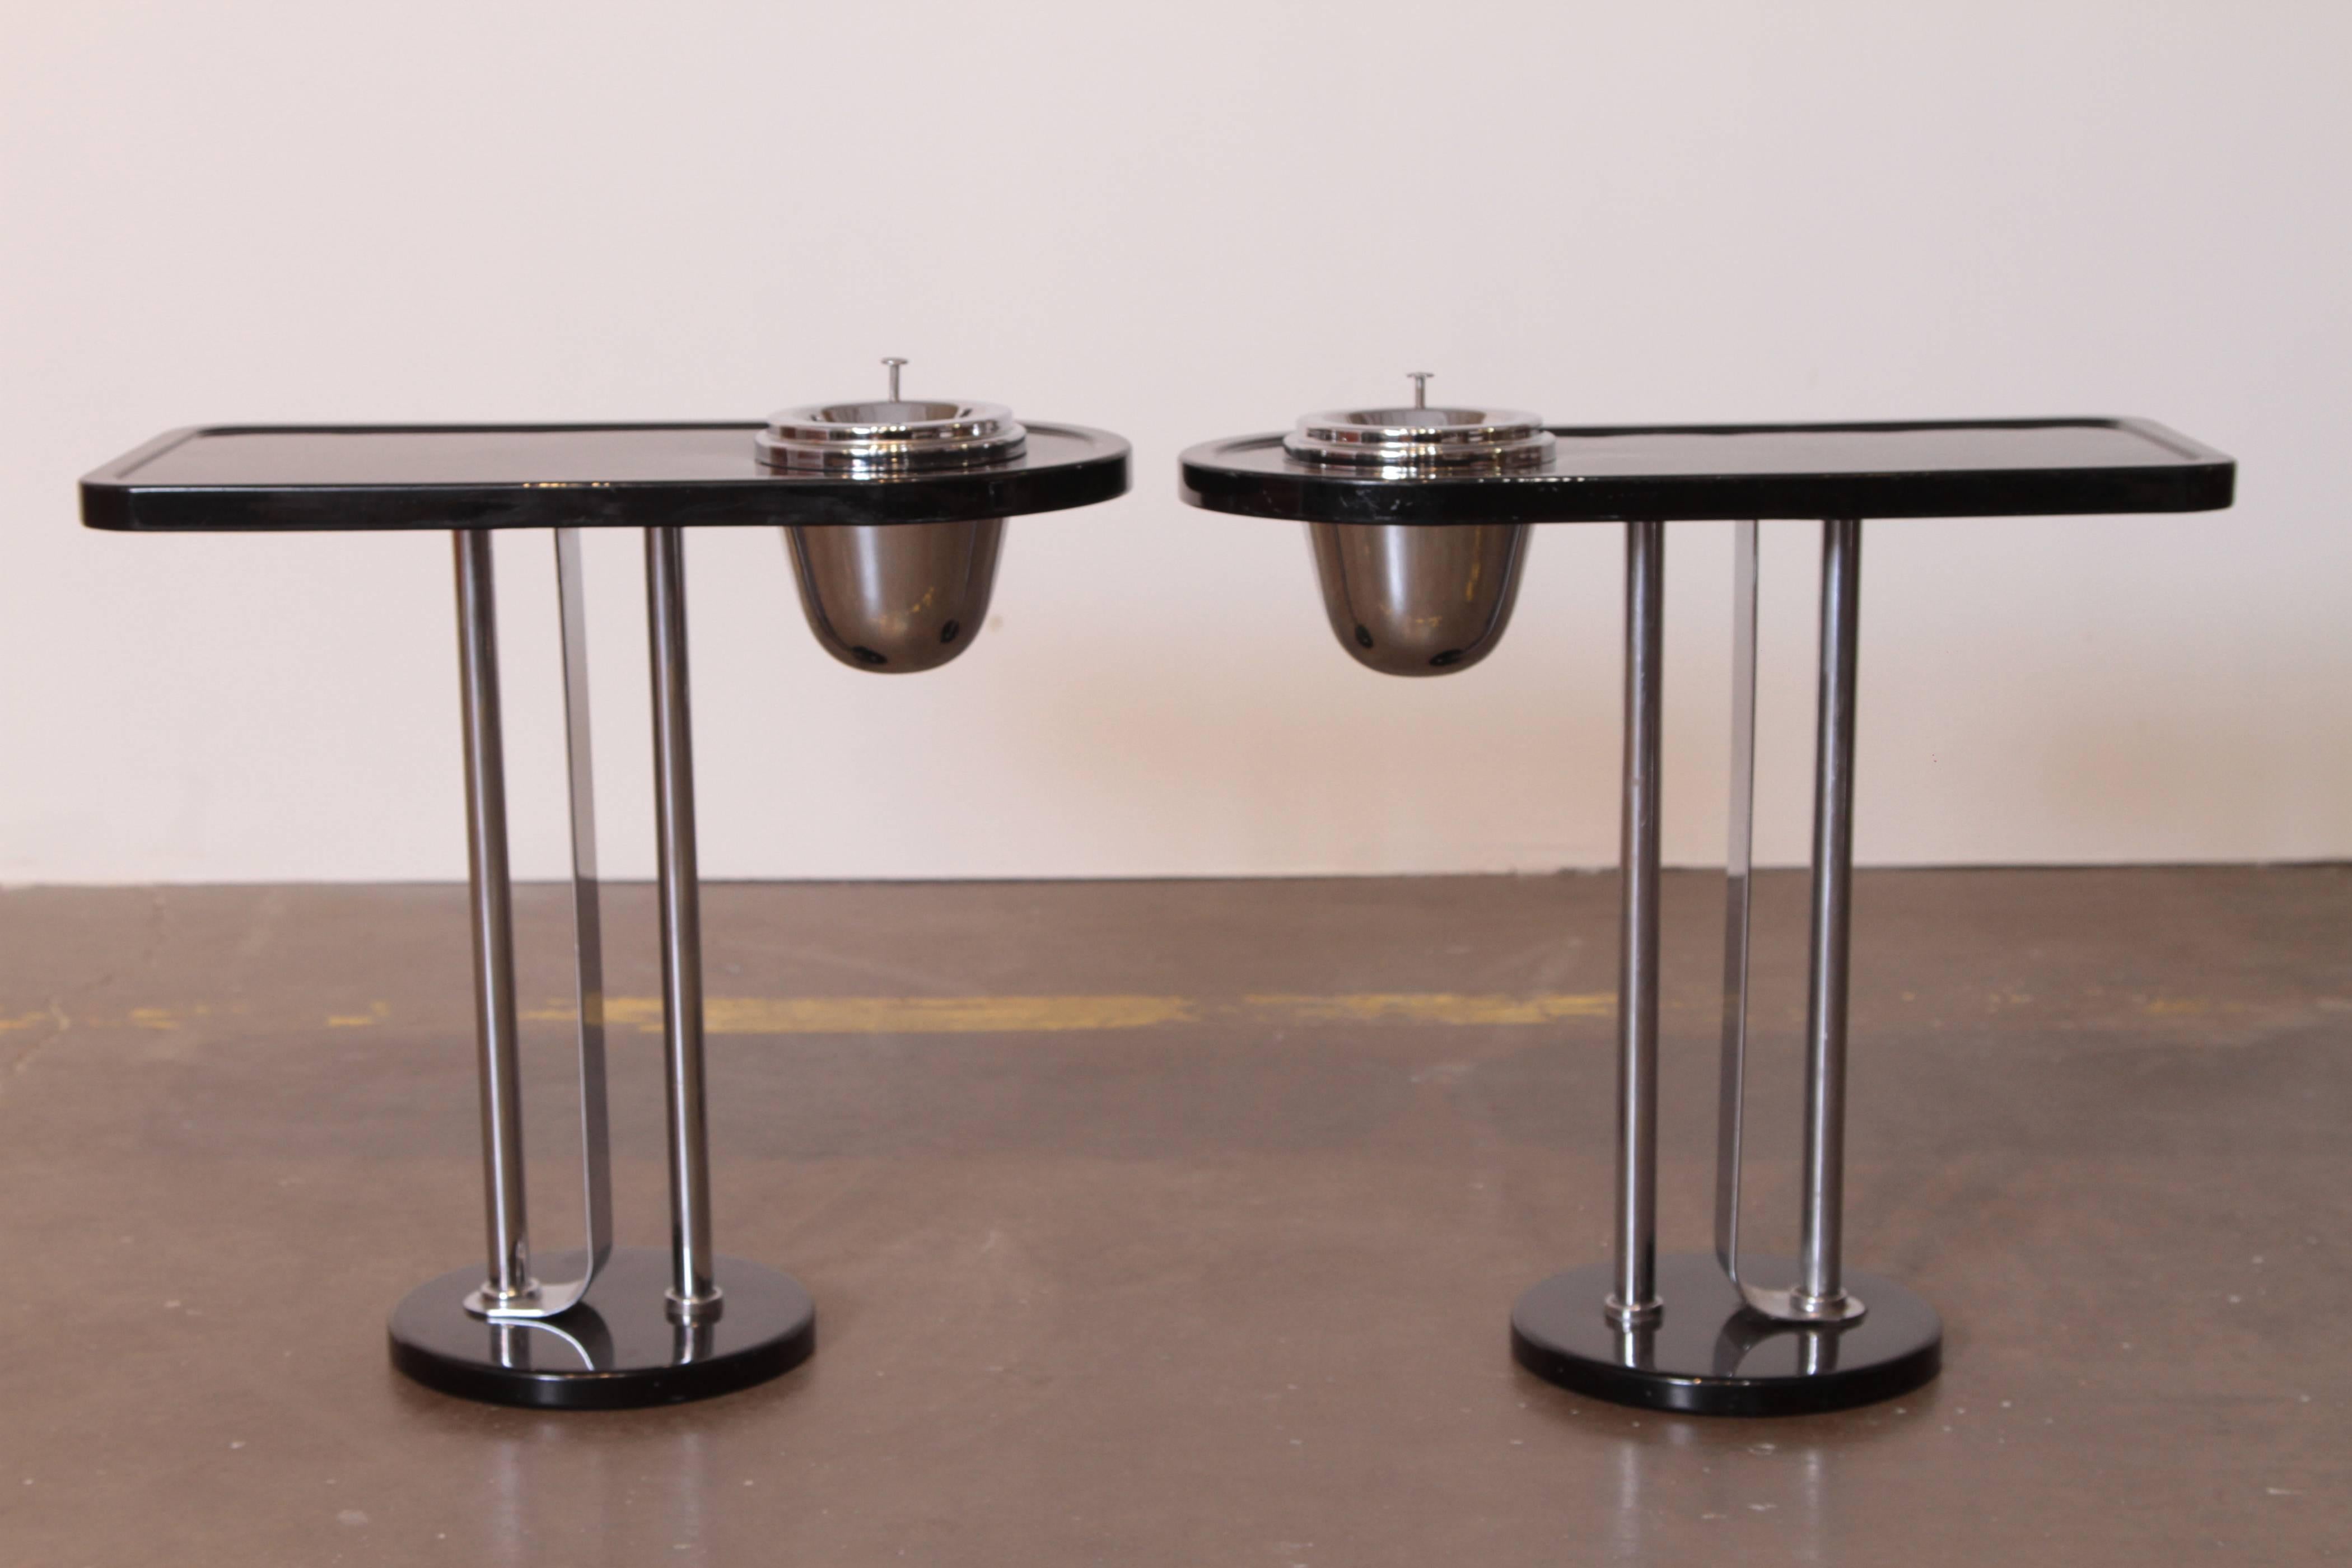 Machine Age Art Deco Wolfgang Hoffmann Smoker Tables for Howell, Signed Pair For Sale 4